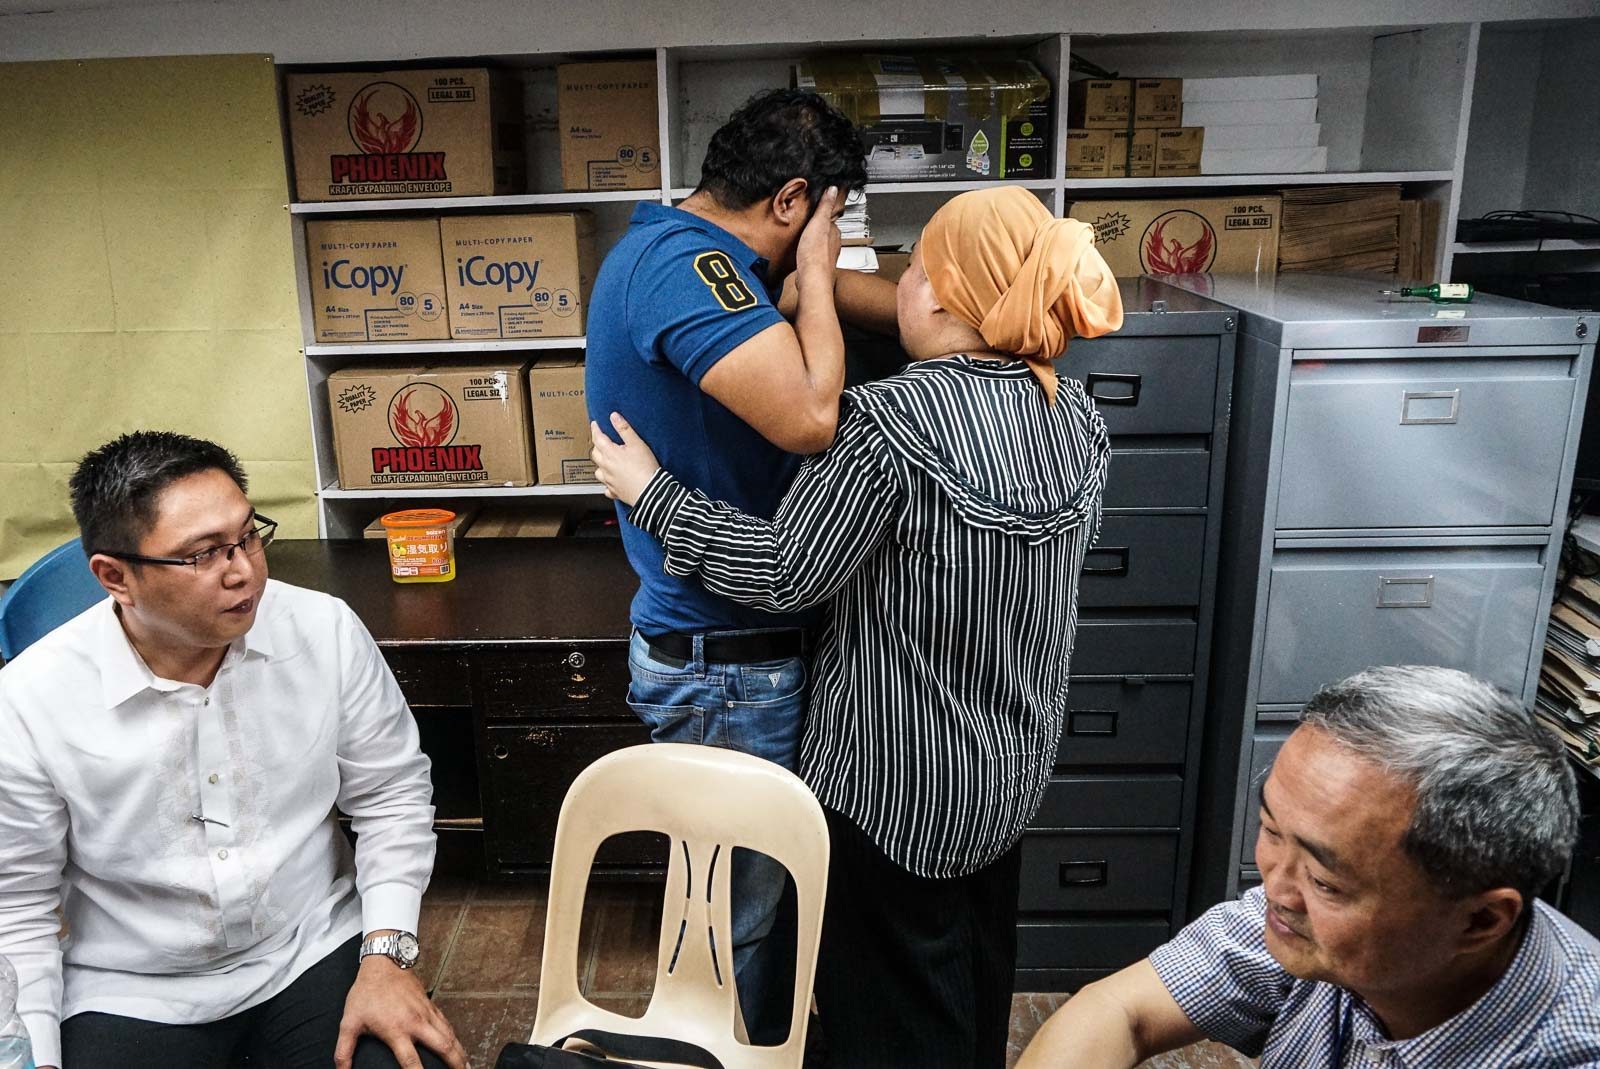 EMOTIONAL. Marawi City Vice Mayor Arafat Salic is comforted by a relative after the Justice Department ordered his release on March 15, 2019, after being arrested for rebellion charges on March 13. Photo by Lito Borras/Rappler   